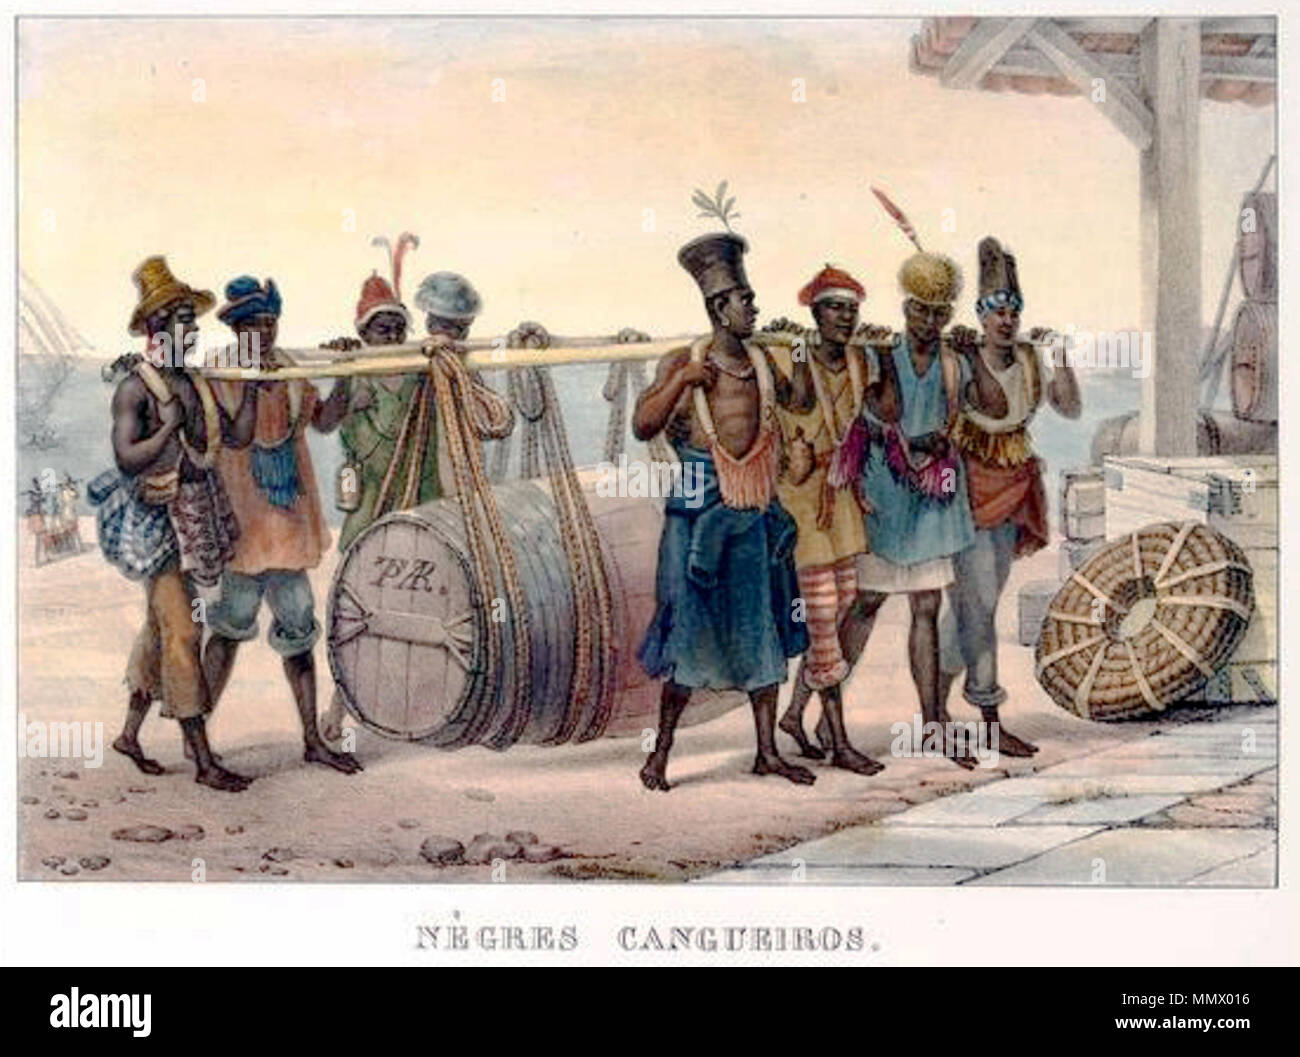 English: Cargo Negros. Slaves in Brazil circa 1830. New York Public Library  Division: Humanities and Social Sciences Library / Print Collection, Miriam  and Ira D. Wallach Division of Art, Prints and